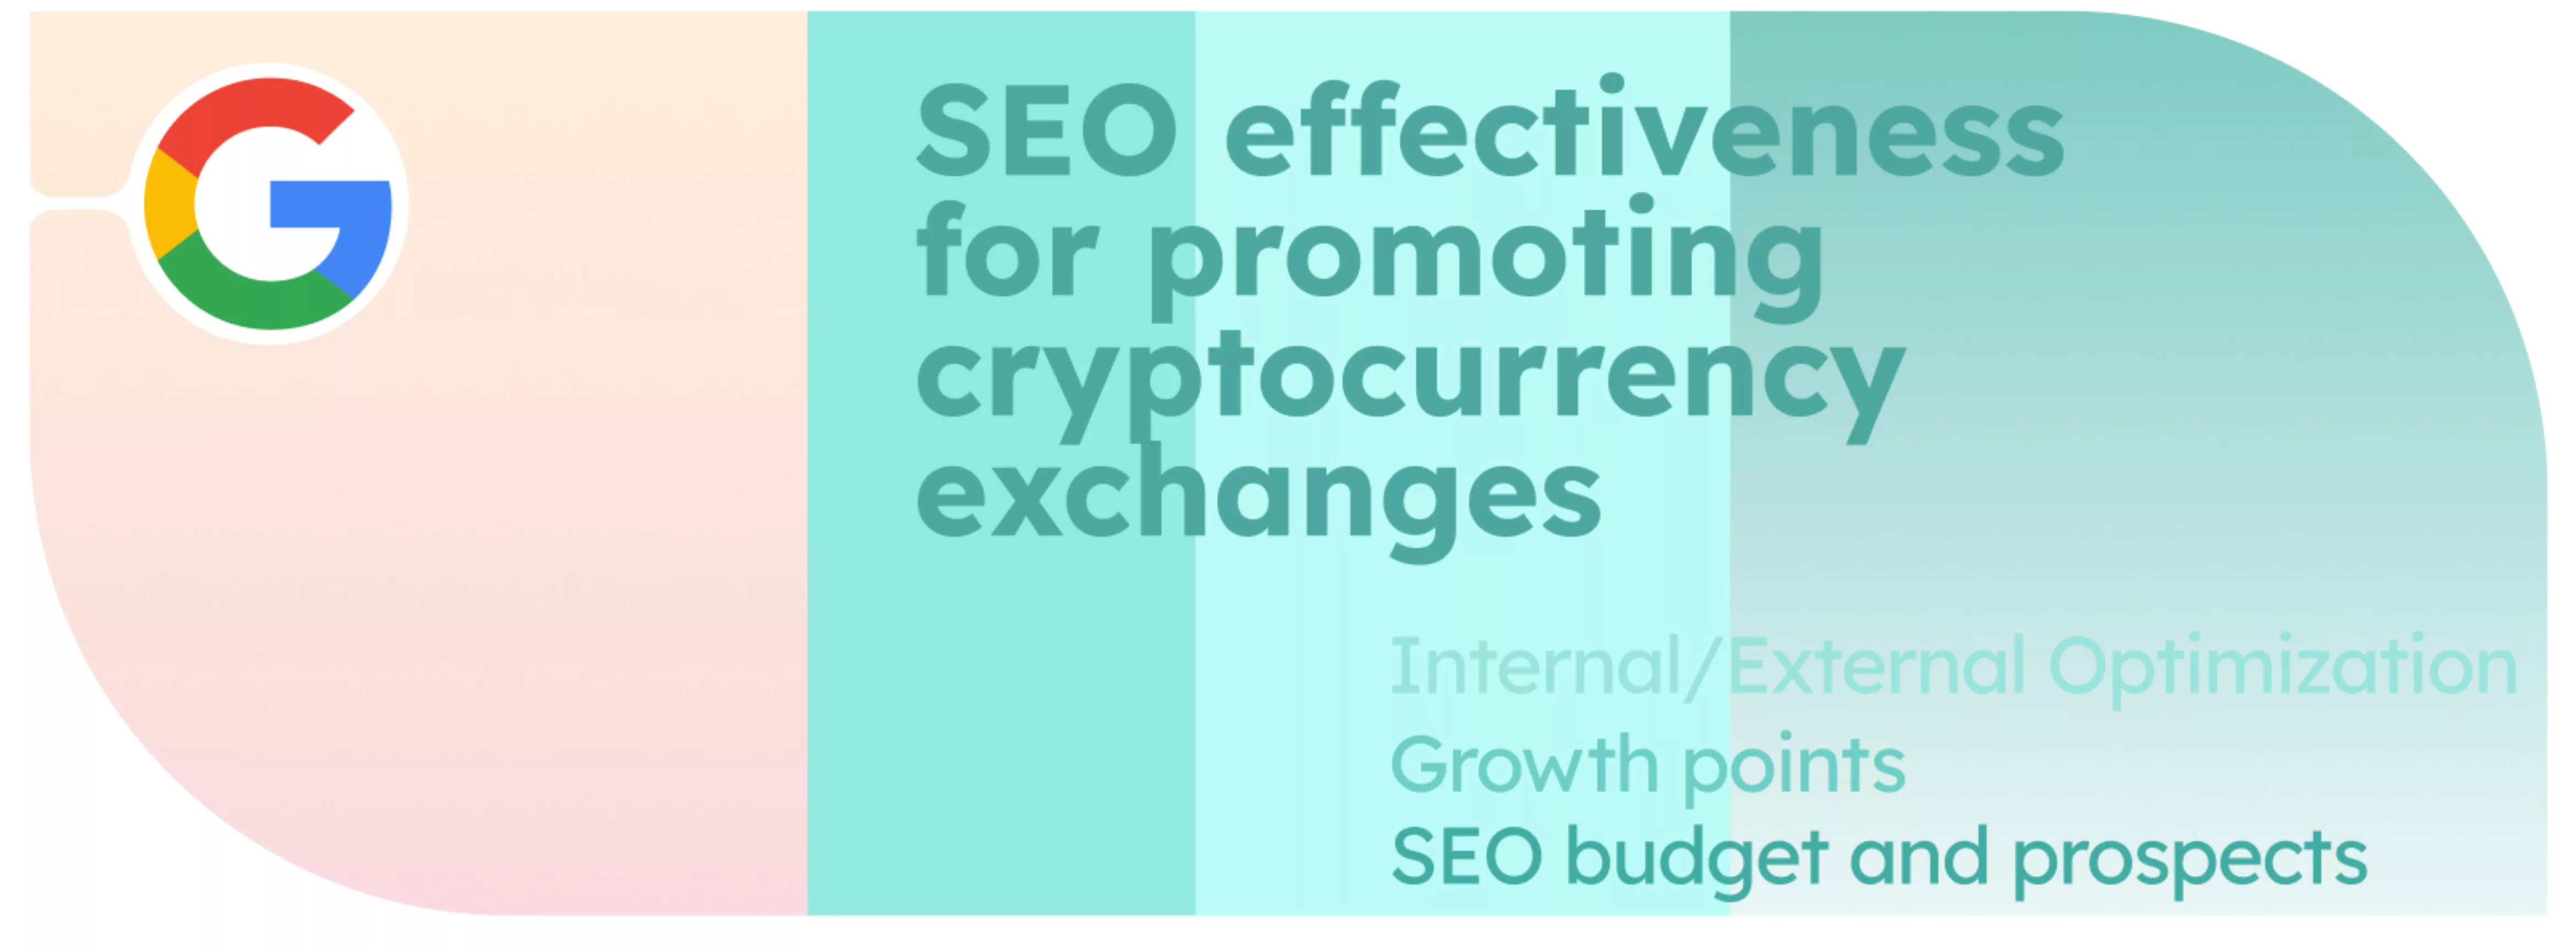 SEO Effectiveness for Promoting Cryptocurrency Exchanges